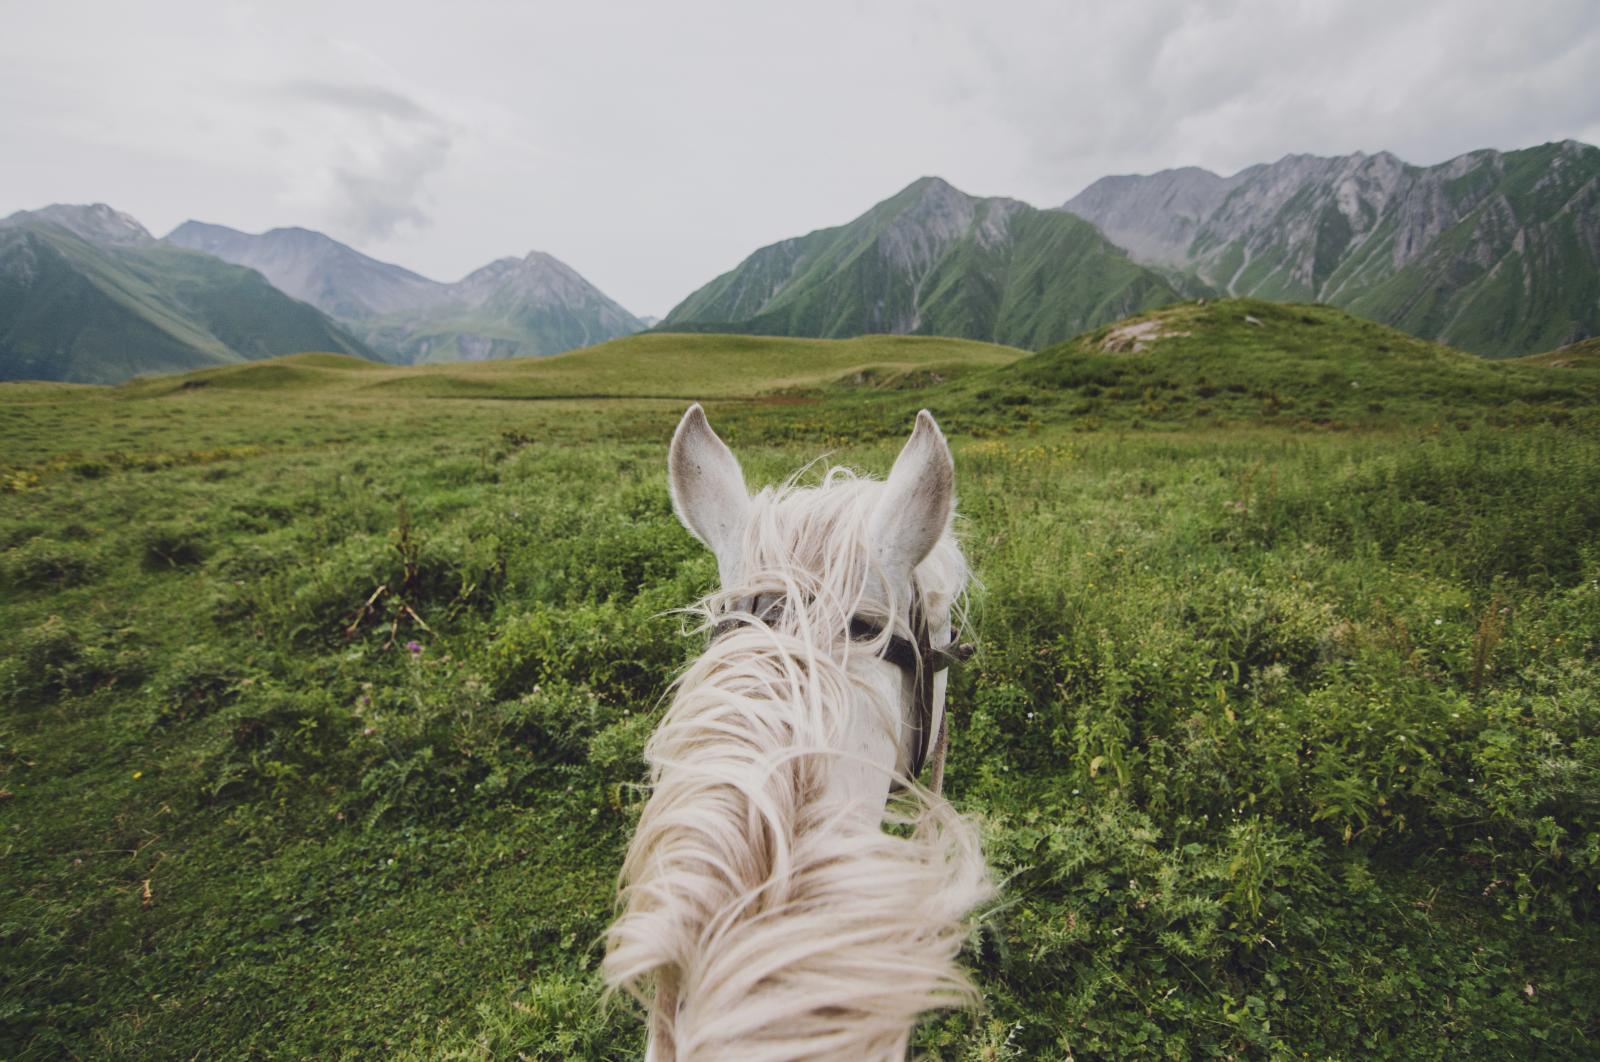 On a horseback, Caucasus Mountains | Buy this image